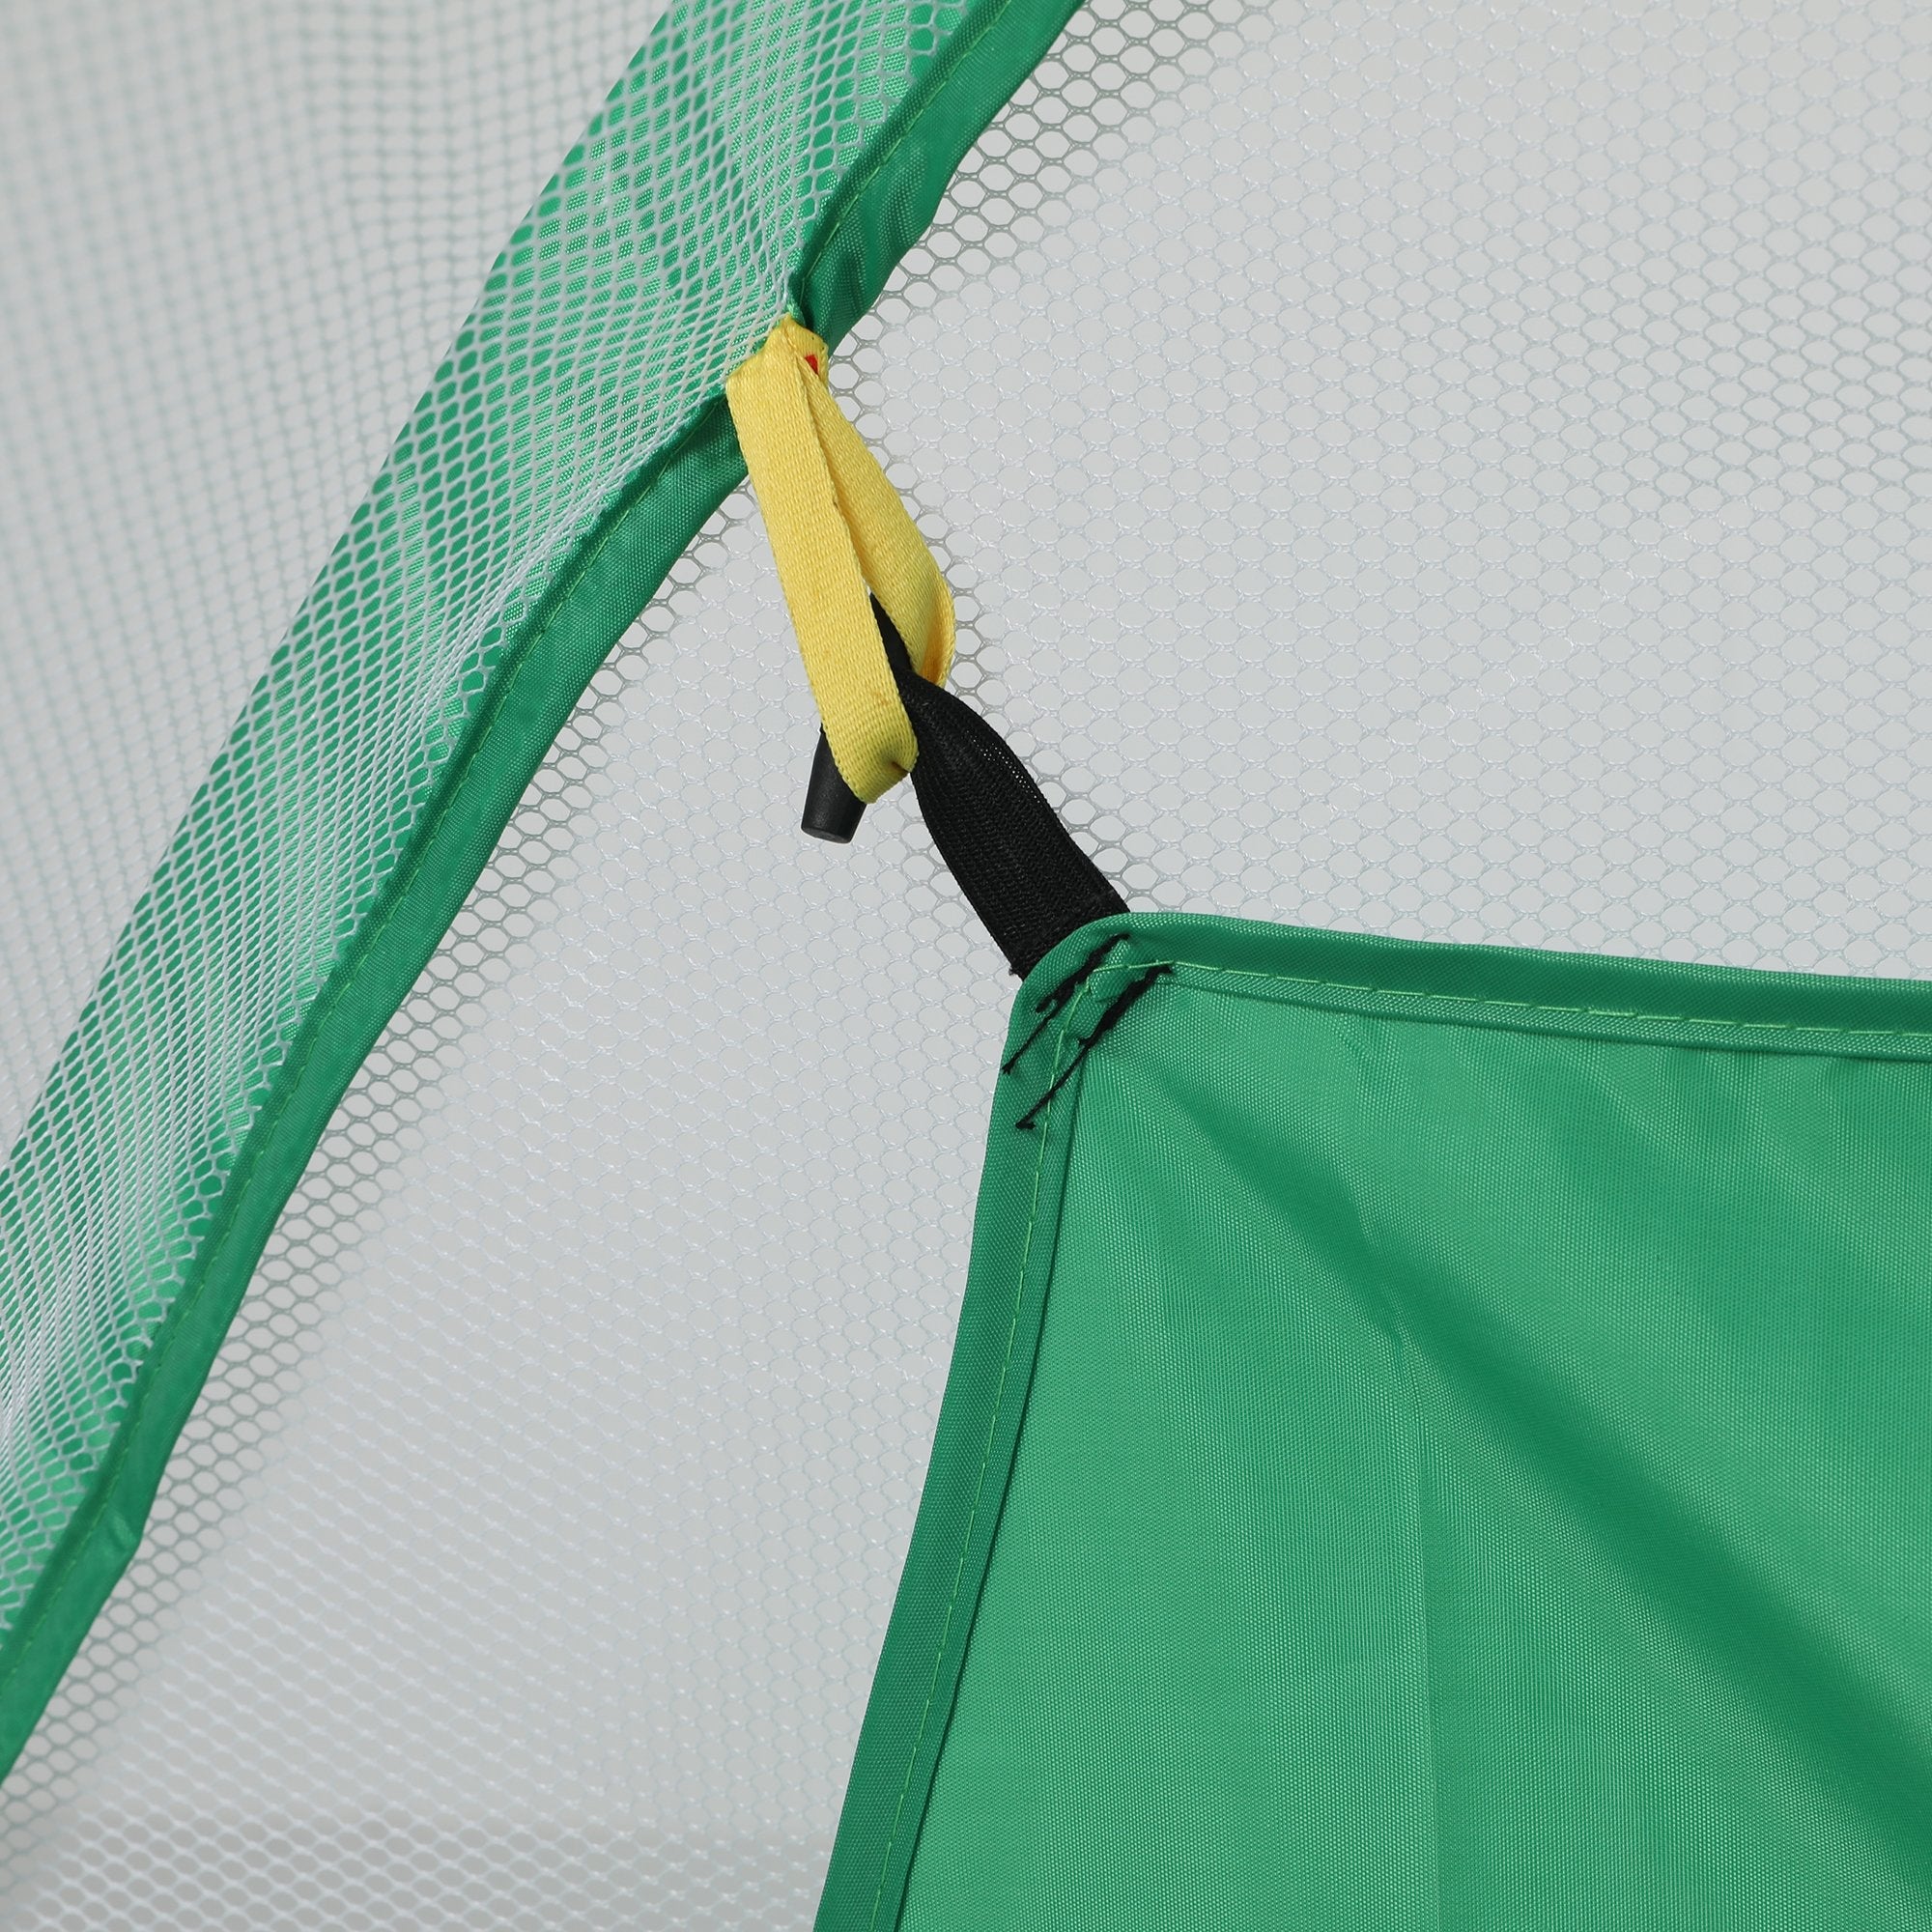 travelling 3M Golf Practice Net Hitting Nets Driving Netting Chipping Cage Training Aid Green